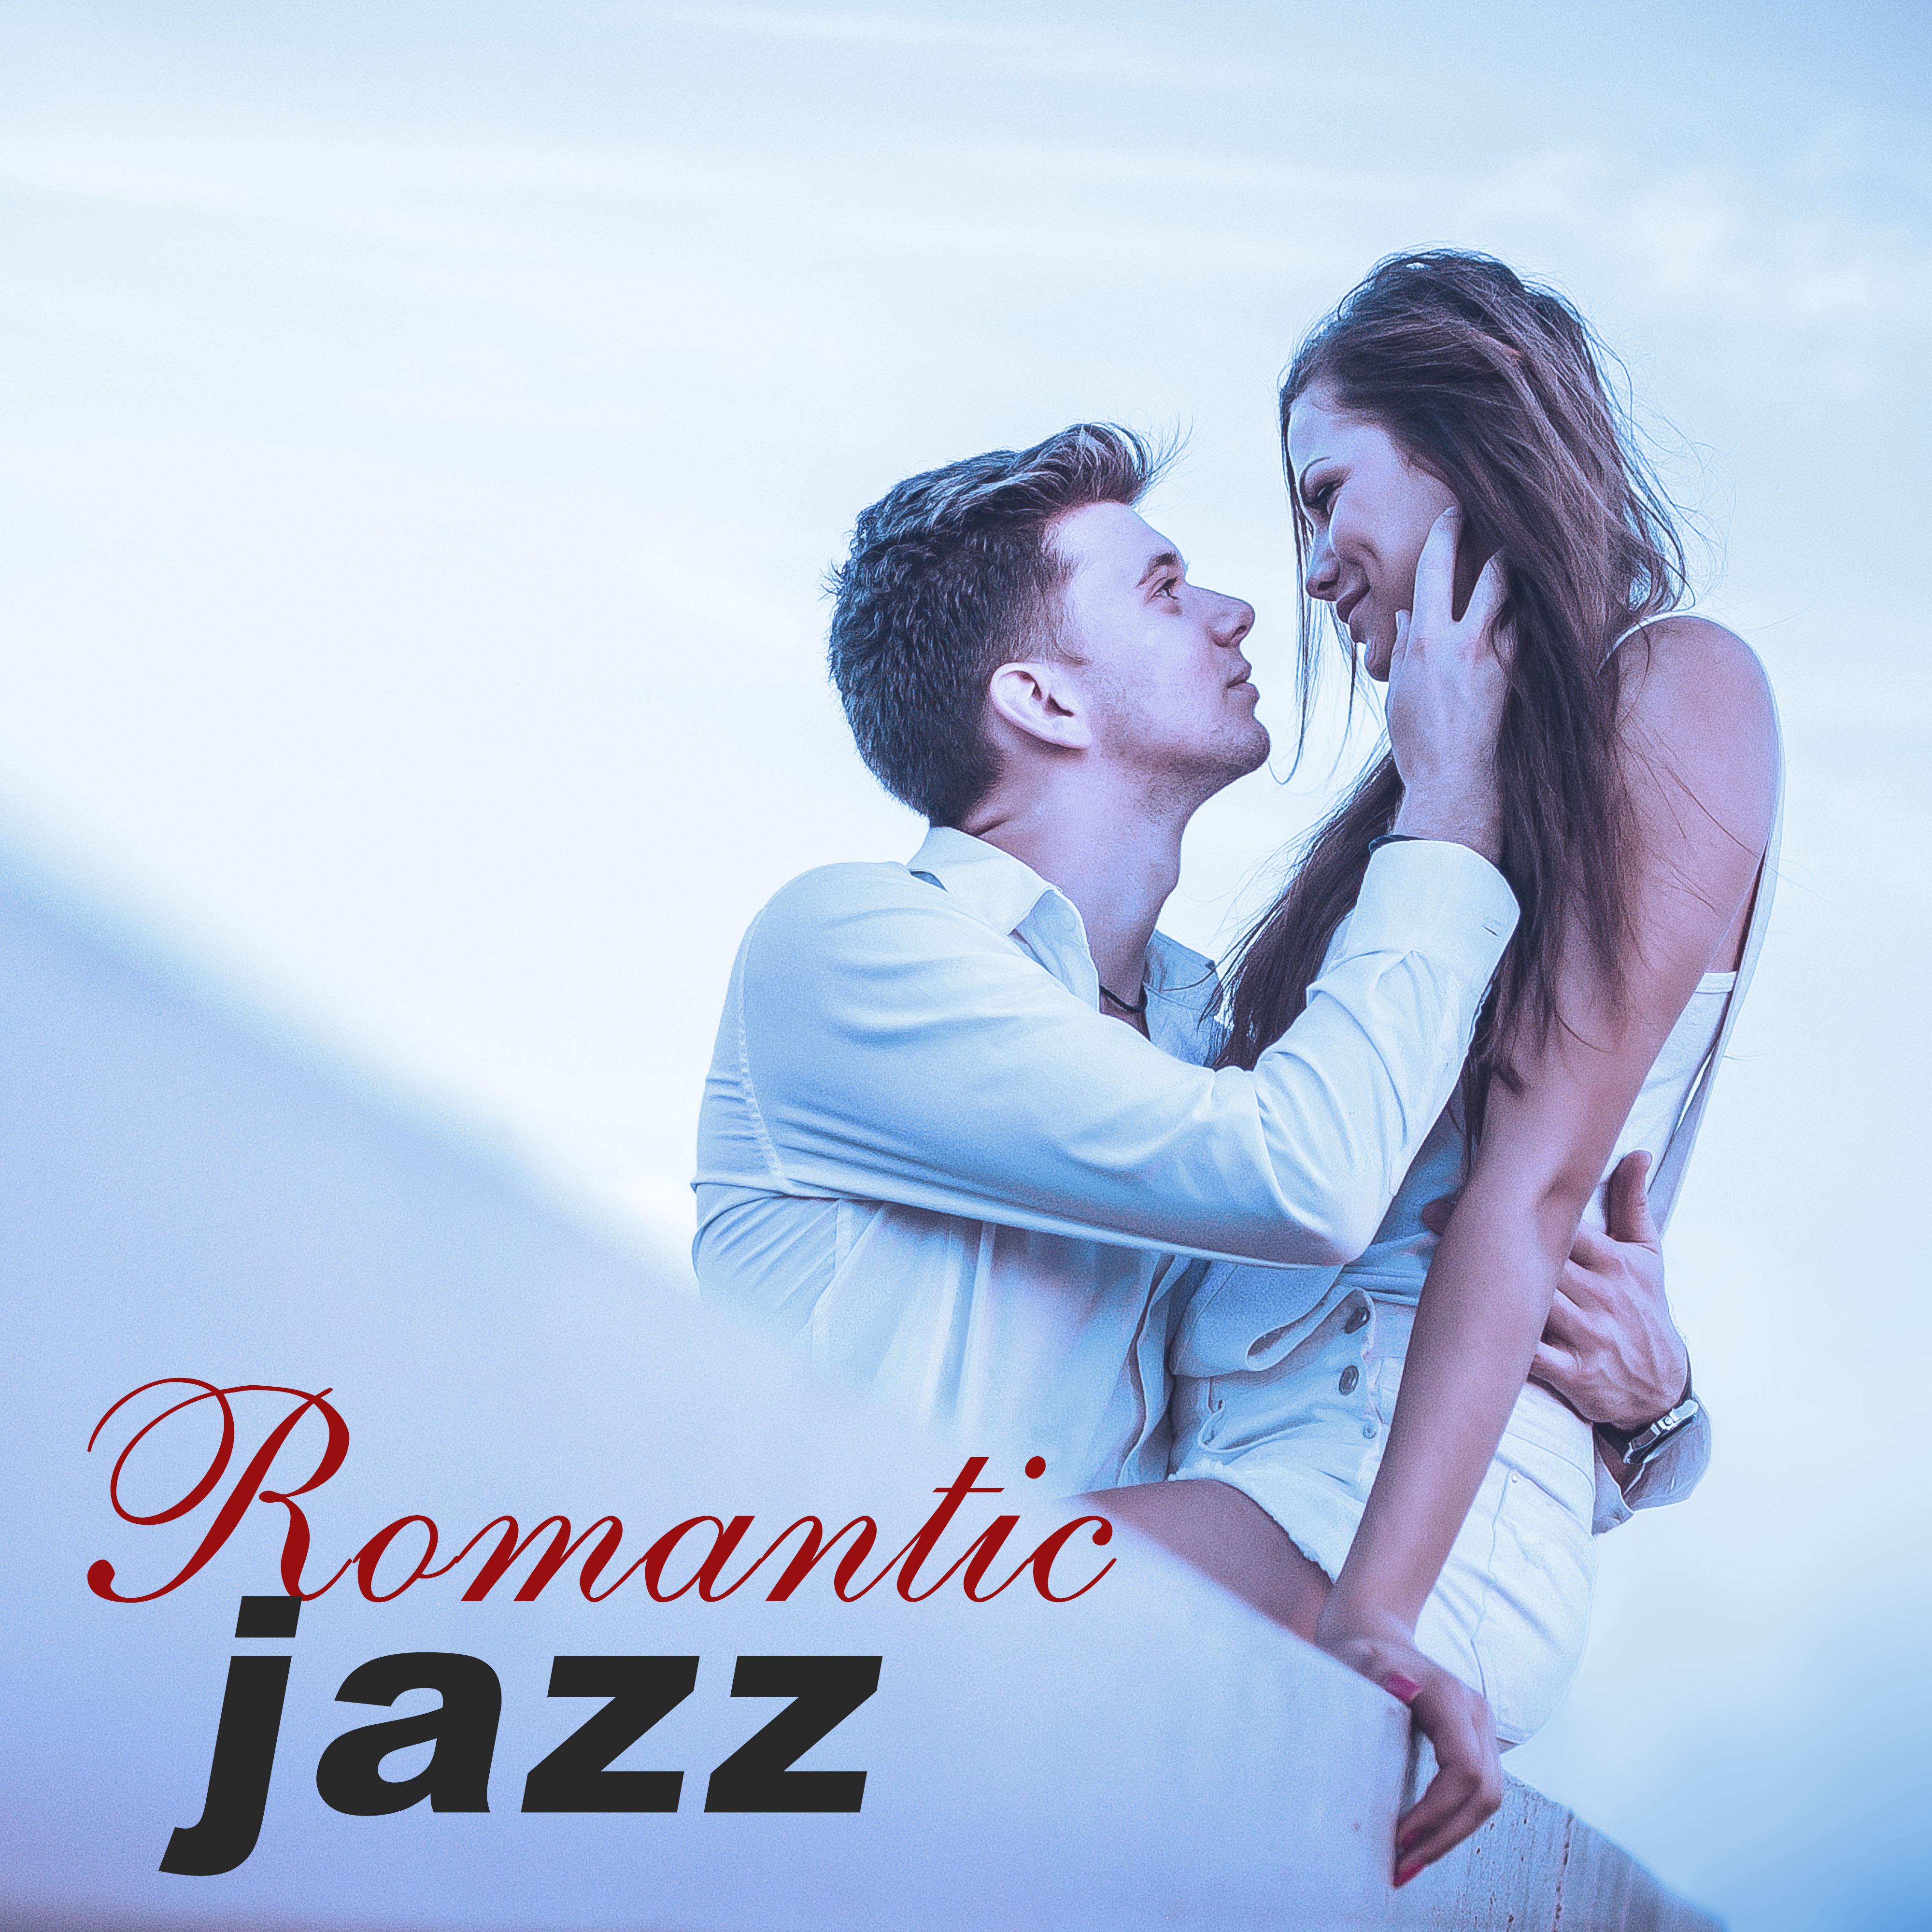 Romantic Jazz – Most ****, Romantic Jazz, Falling In Love, Intimate Moments, Making Love, Candle Light, Dinner for Two, Mellow Jazz